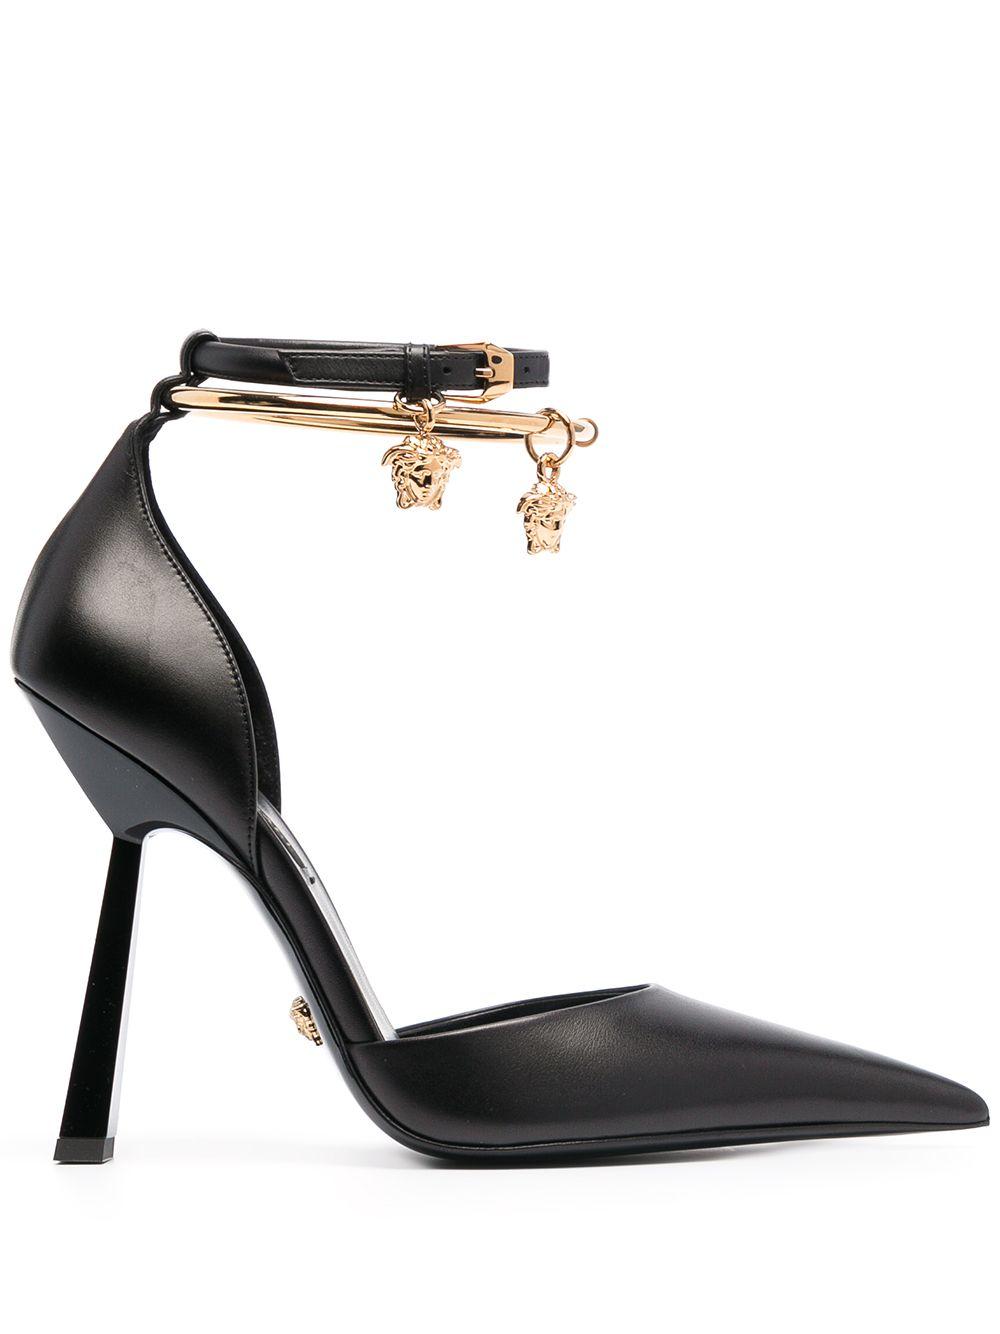 Versace Medusa Charm Pointed Pumps in Black | Lyst